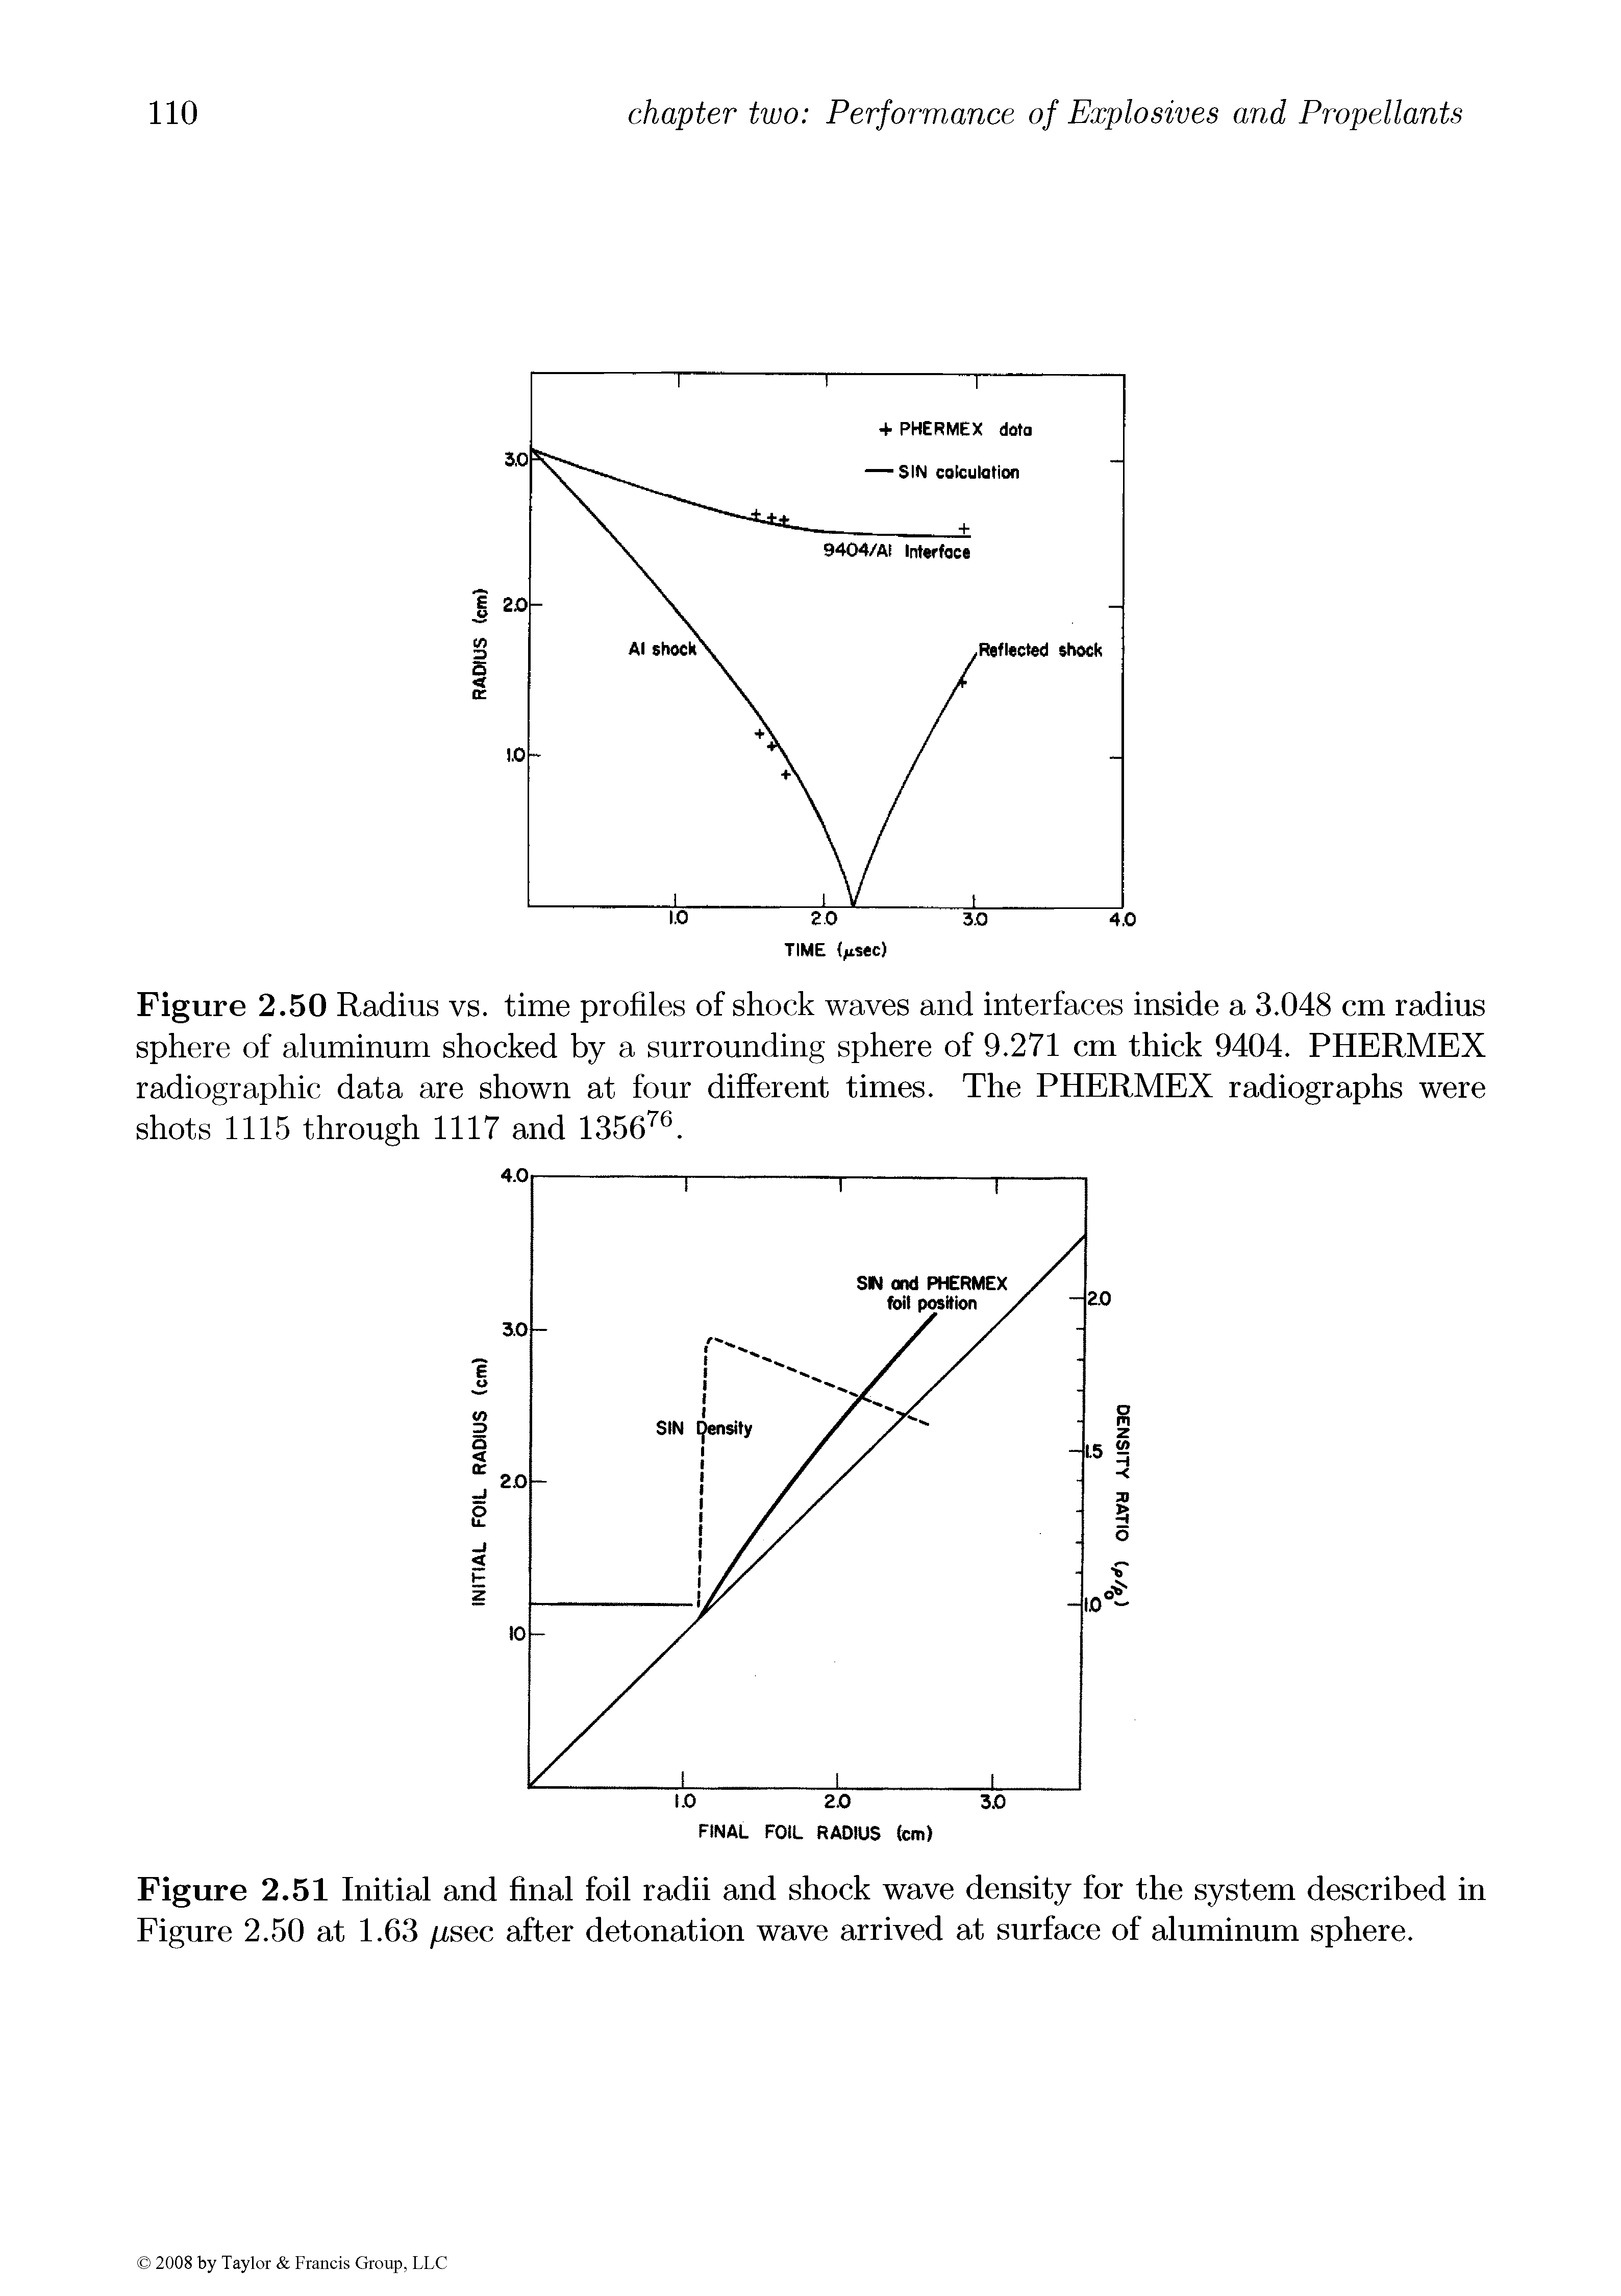 Figure 2.51 Initial and final foil radii and shock wave density for the system described in Figure 2.50 at 1.63 //sec after detonation wave arrived at surface of aluminum sphere.